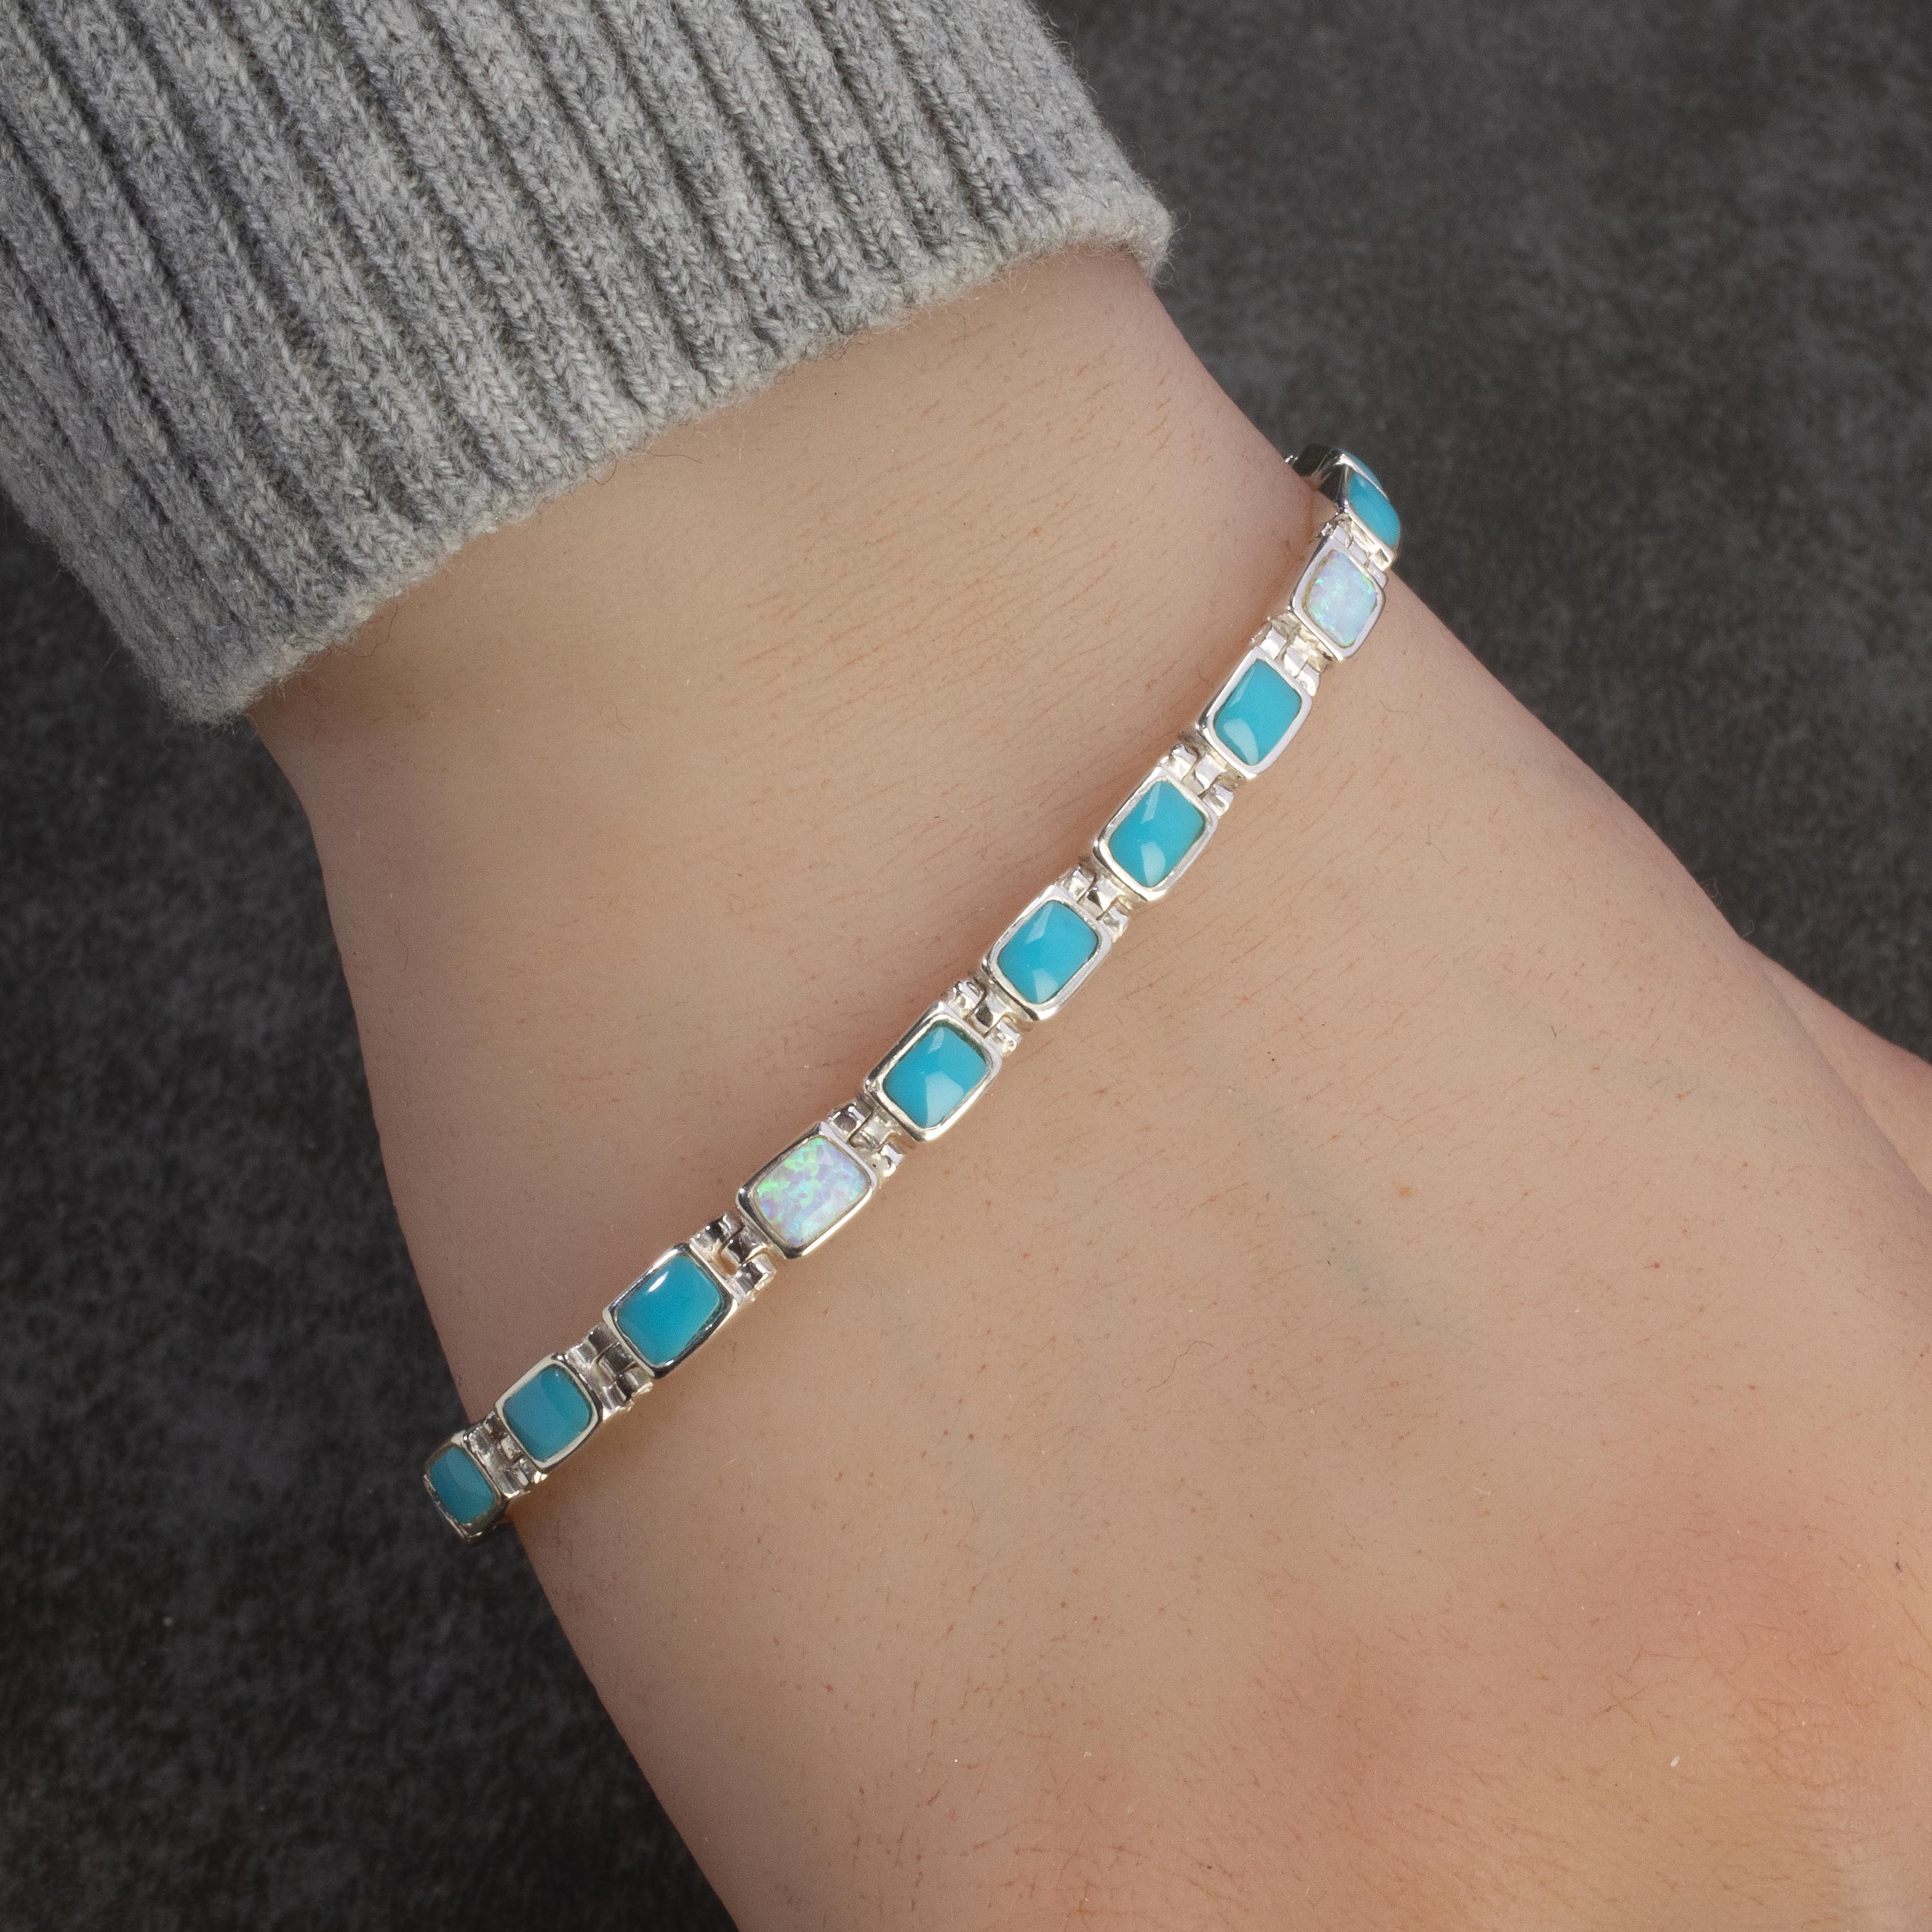 Kalifano Southwest Silver Jewelry Turquoise 925 Sterling Silver Bracelet USA Handmade with Opal Accent NMB.0207.TQ